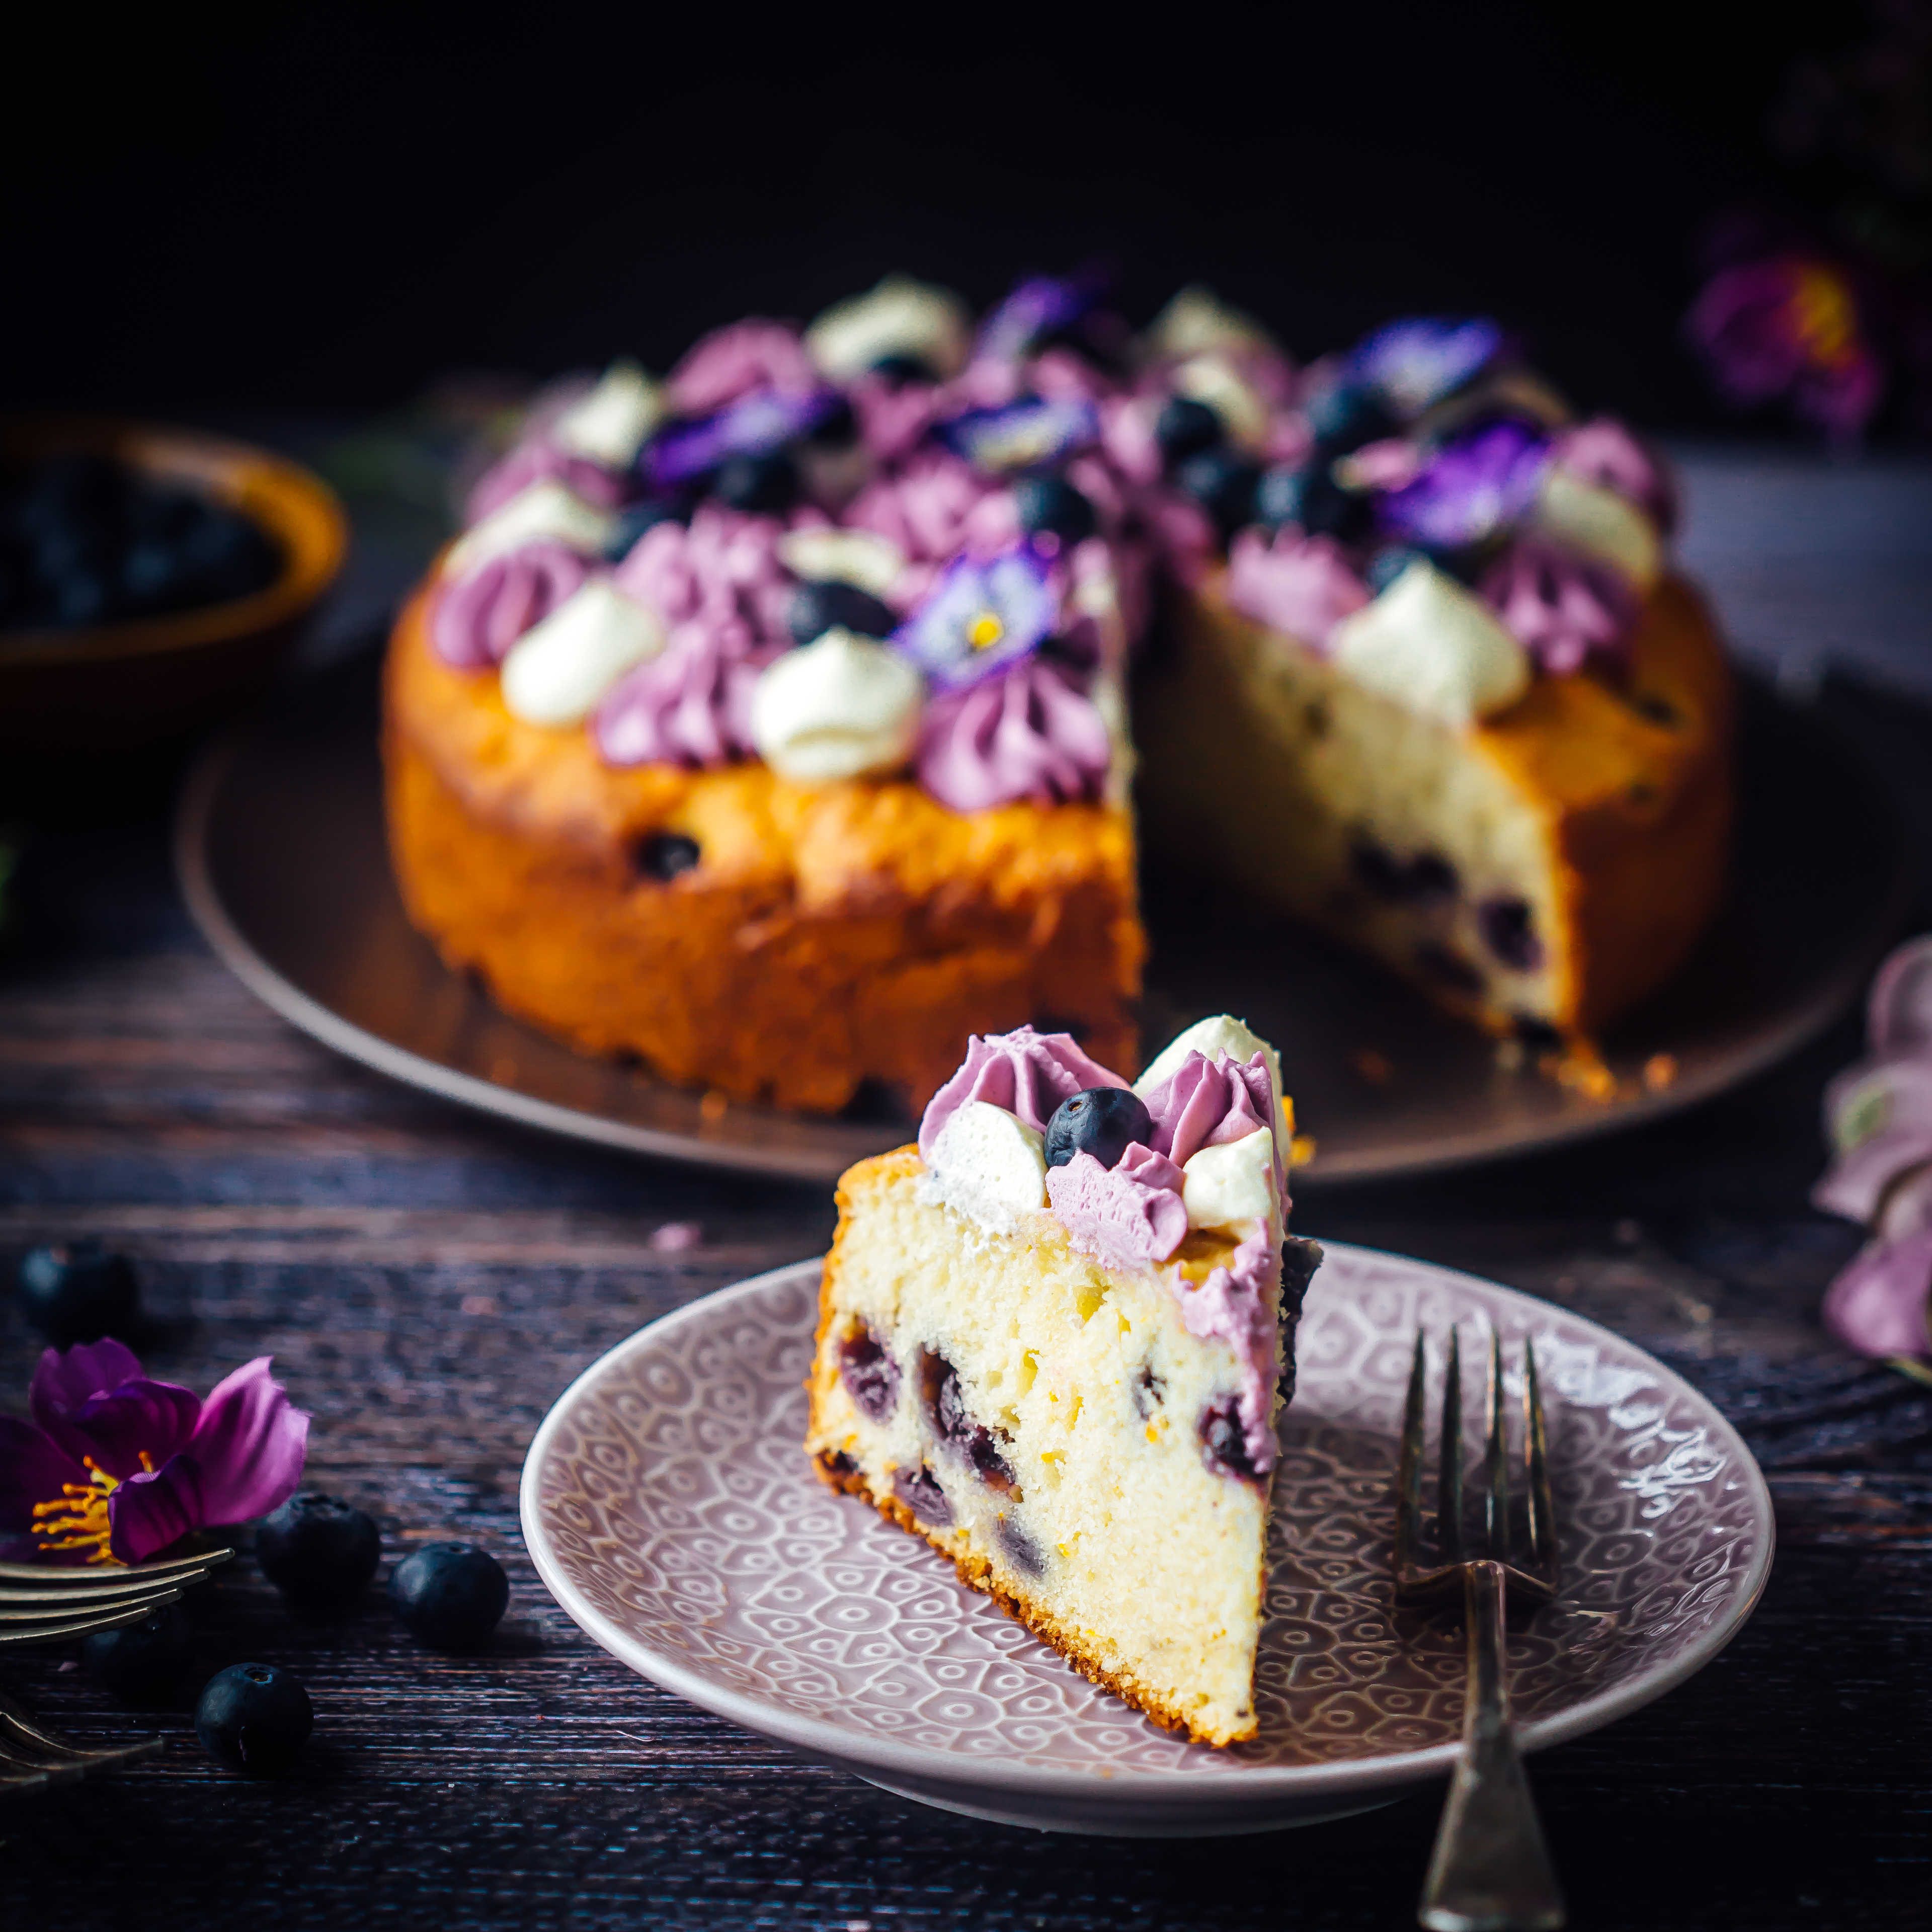 Ricotta Cake with blueberries